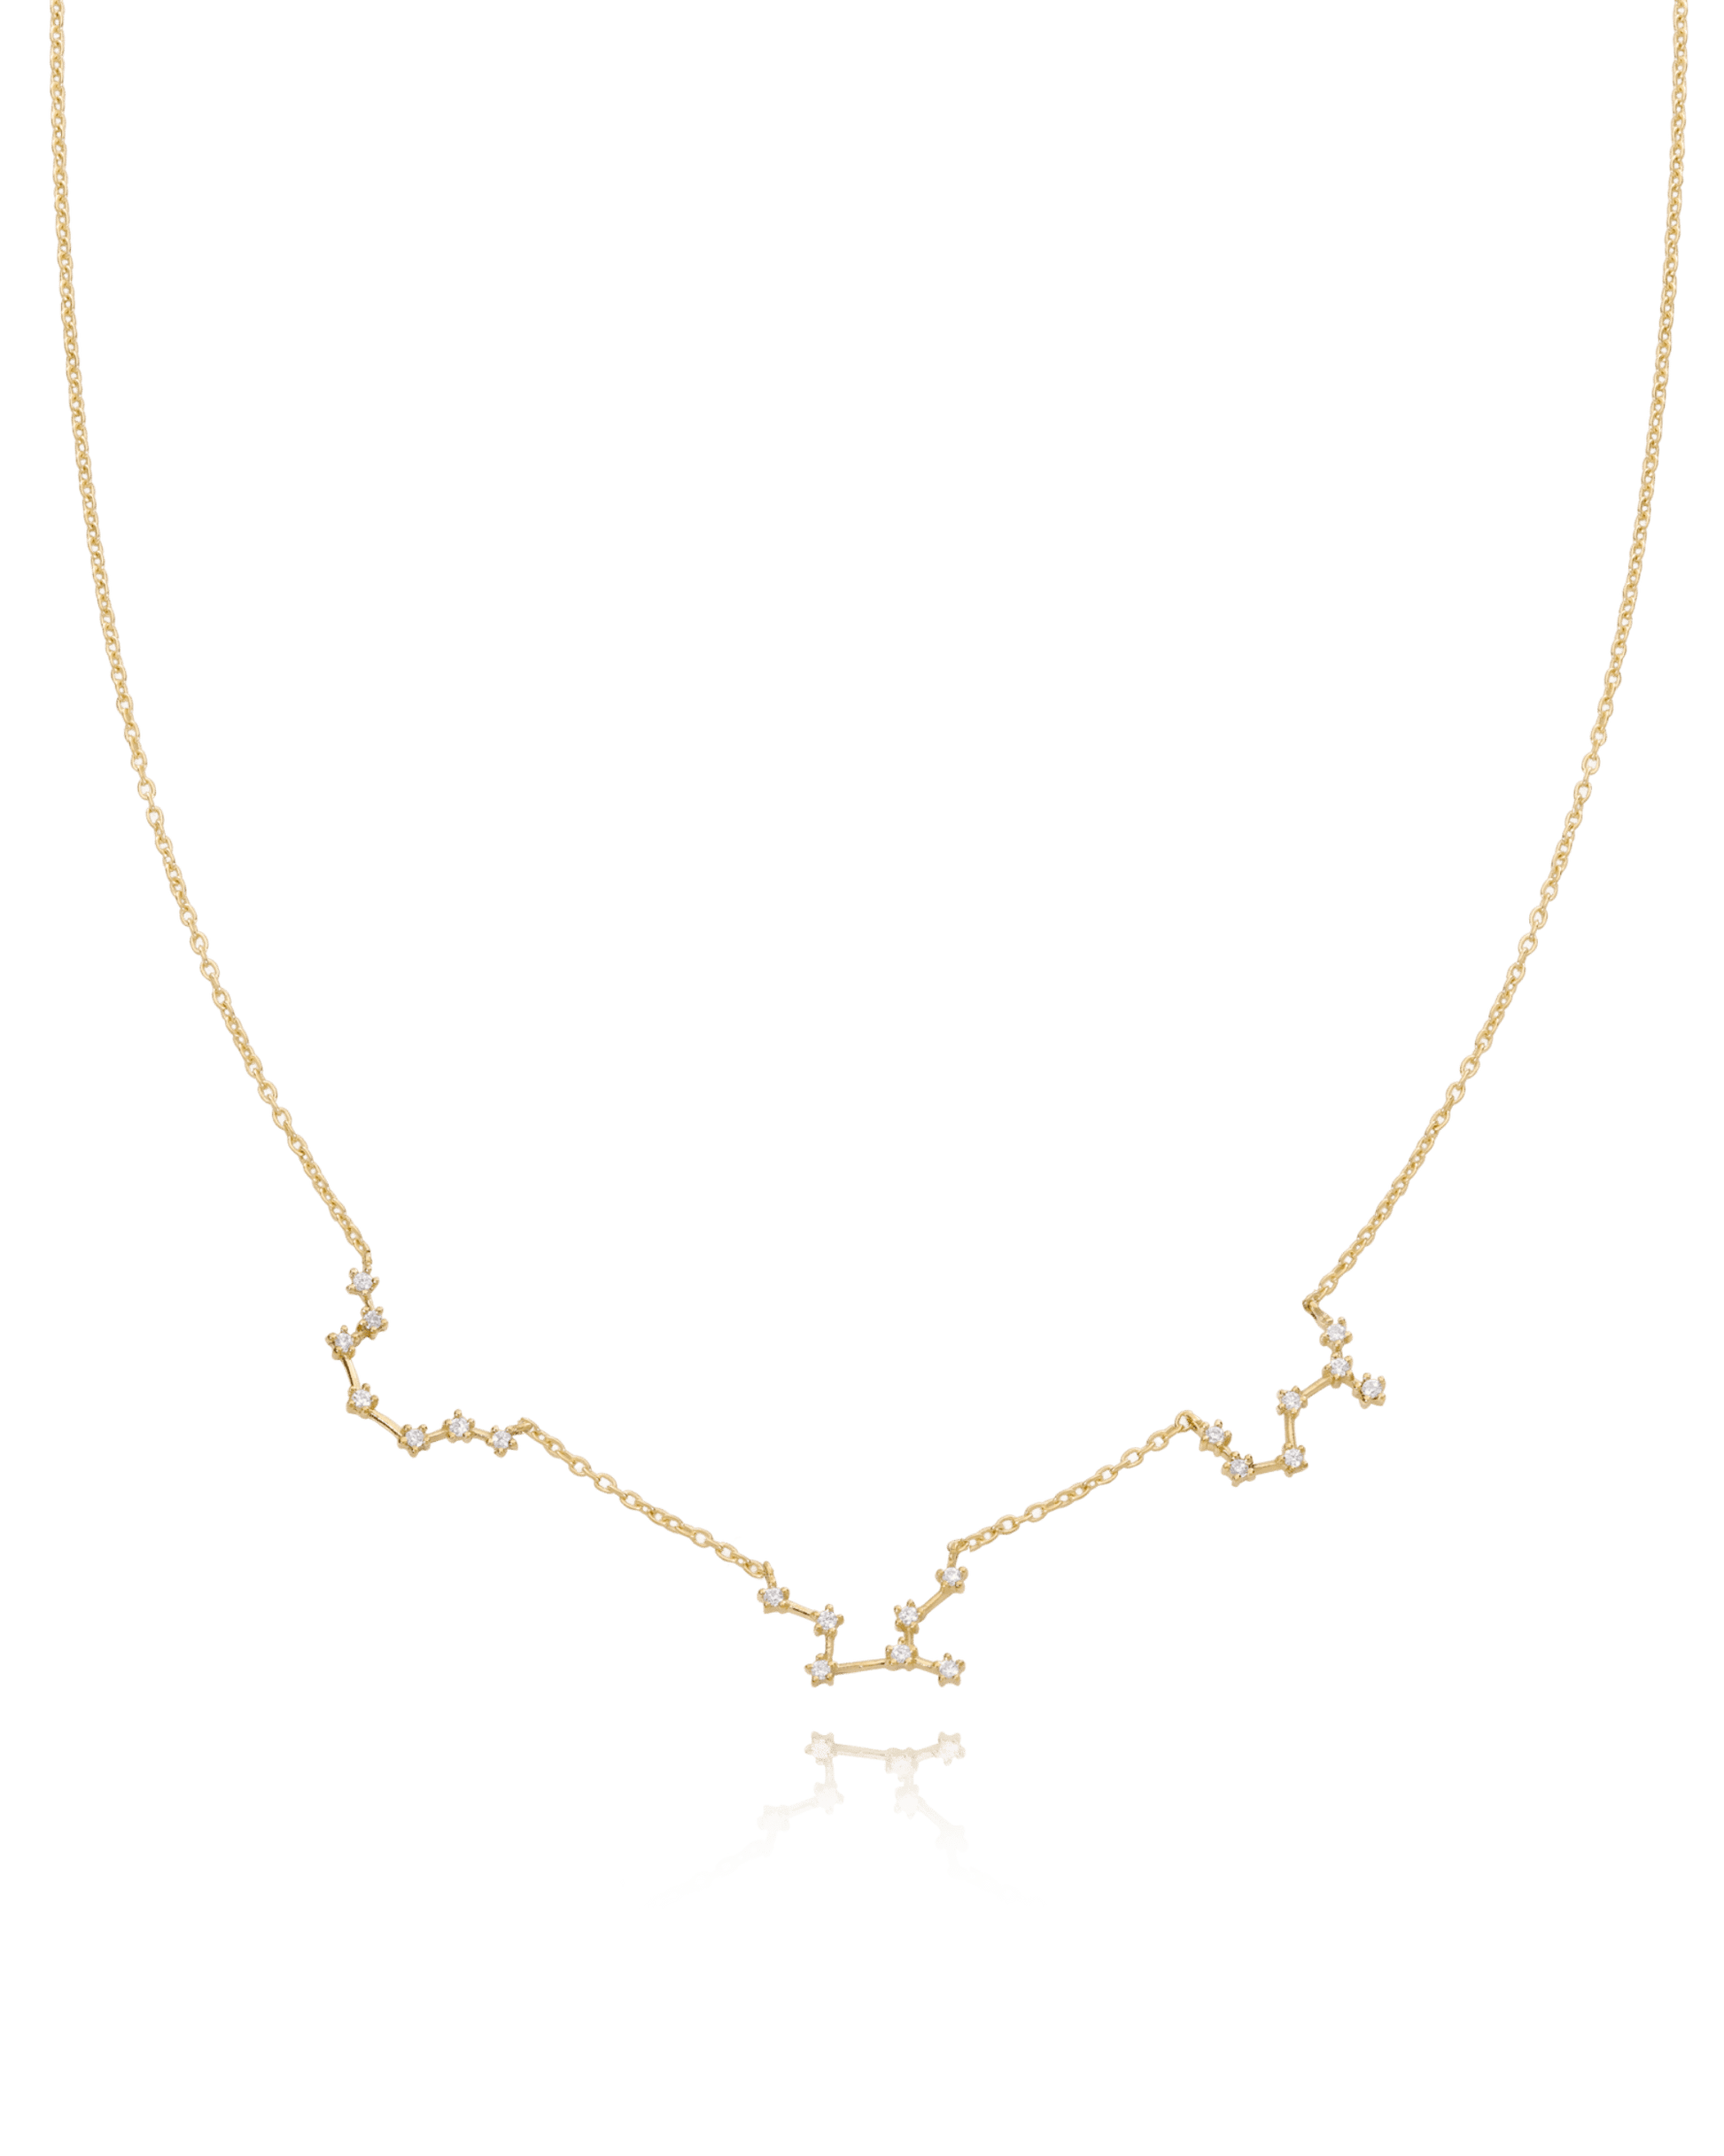 The Constellation Necklace - 18K Gold Vermeil Necklaces magal-dev 1 Constellation 16" 